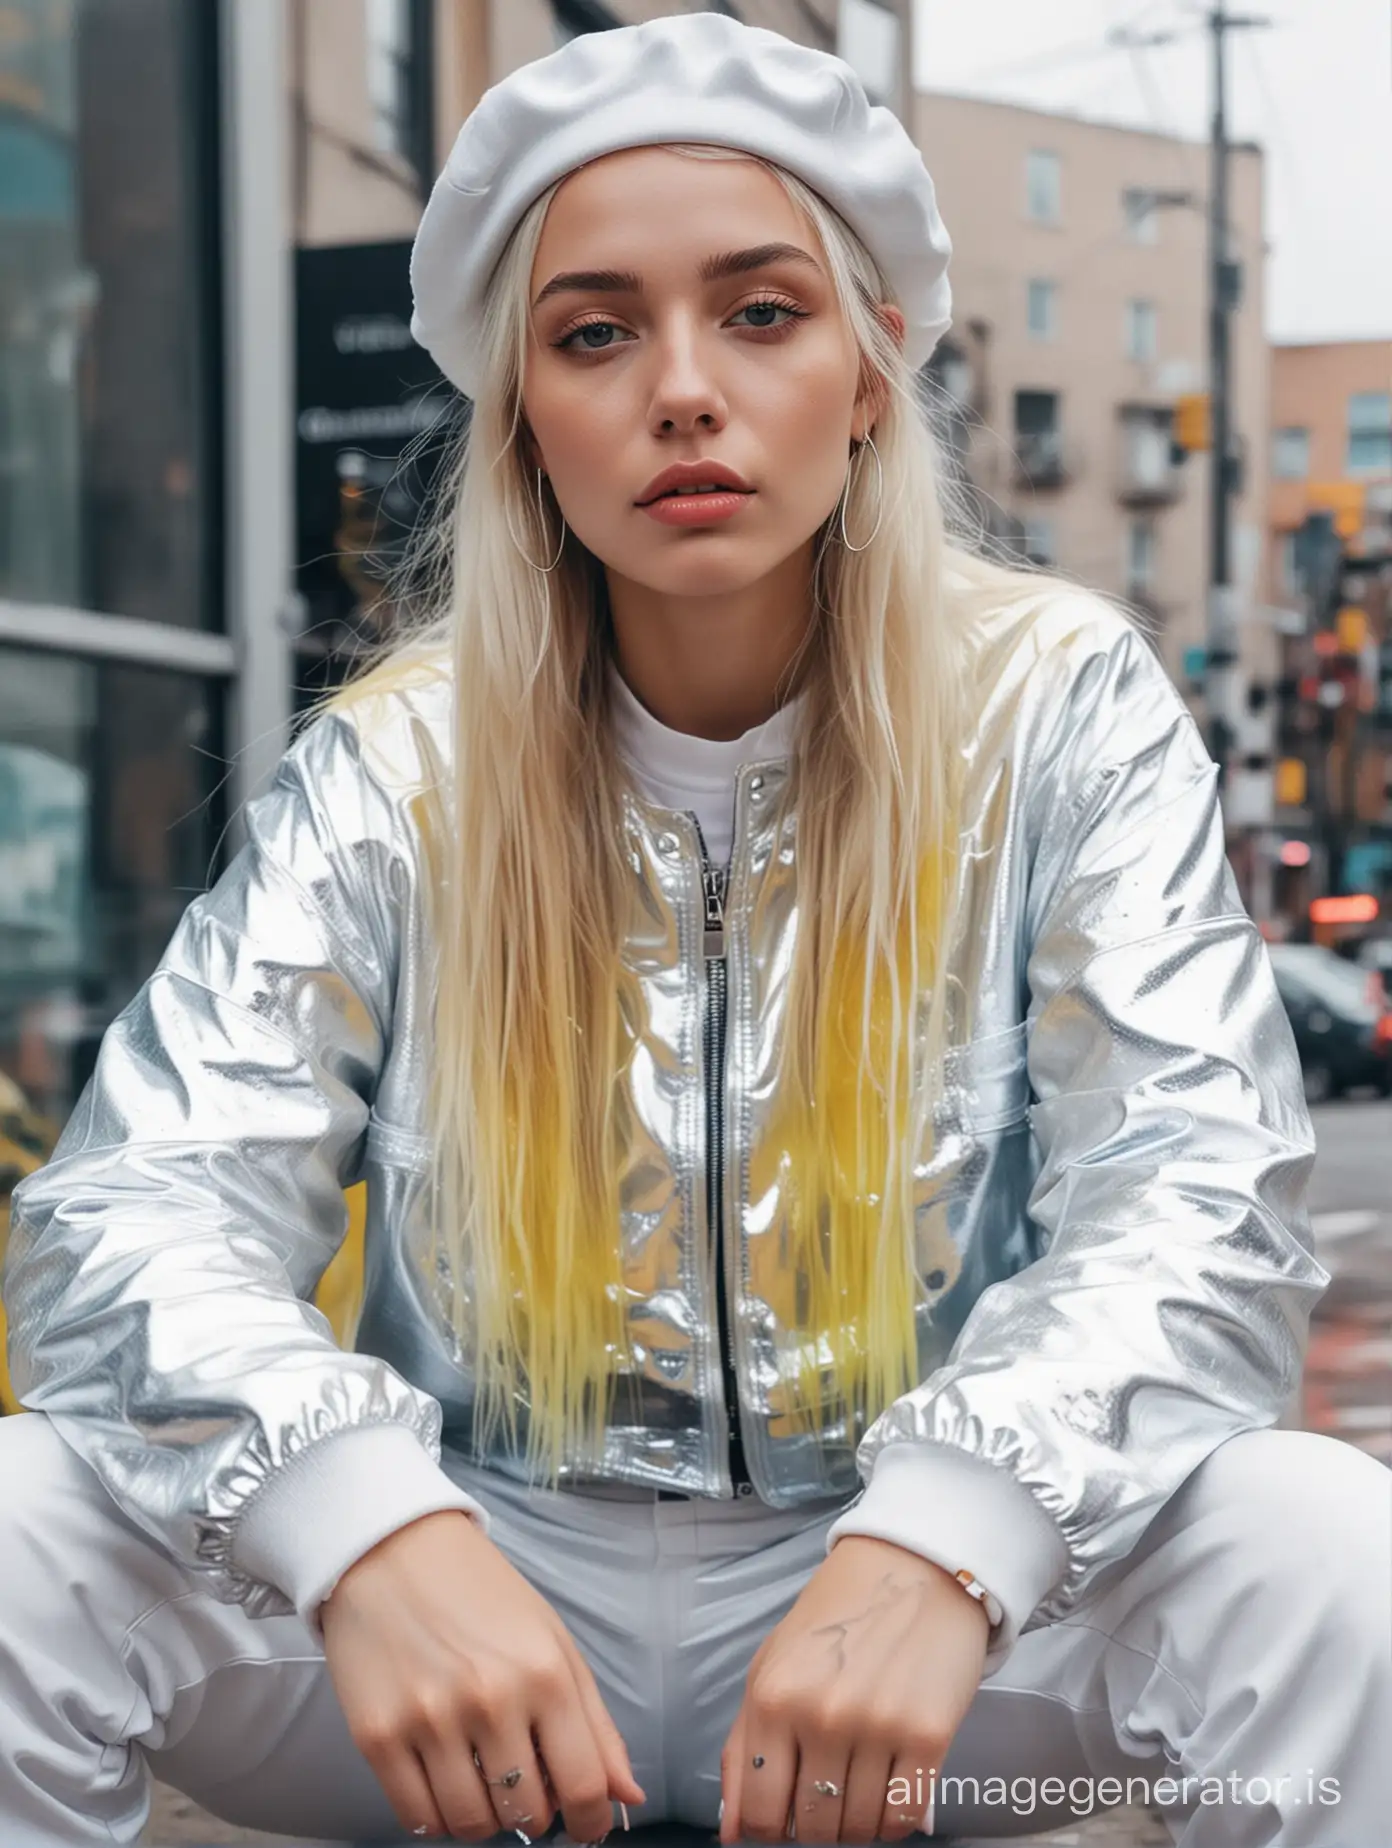 🥰         girl in silver, choker earrings, aesthetics of female face, grunge textures, mascara, wet watercolor, straight long blonde hair wearing a white beret, double exposure, Gangsta Style, VSCO Filter, faux leather oversized jacket, clothing made of holographic lemon fabric, white joggers with sneakers, sitting, full-length, neon filter, background city bright-acid colors